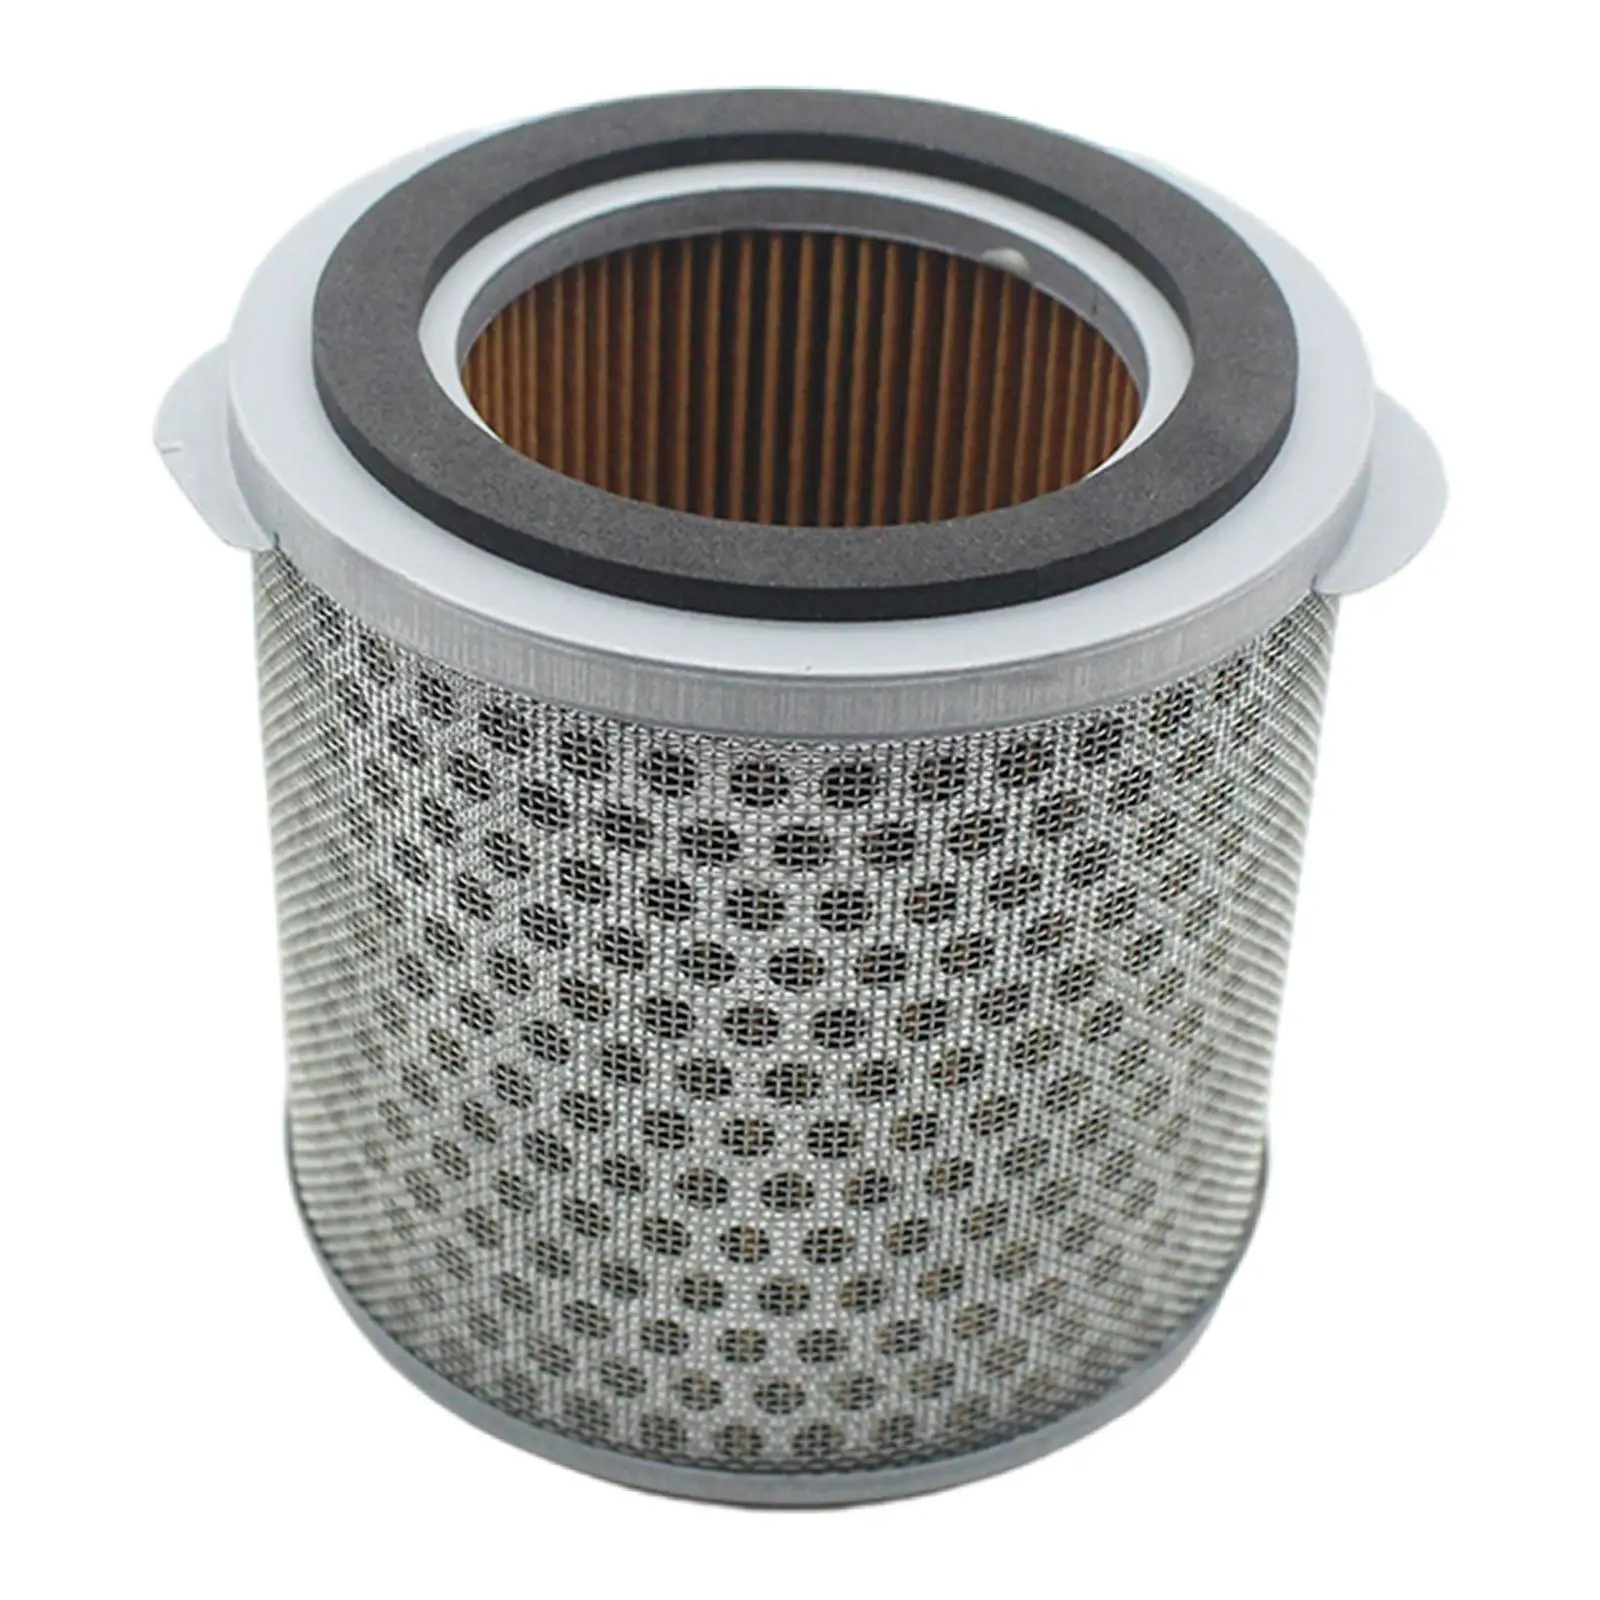 Air Filters Replacement, Motorbike Motorcycle Car Supplies Accessories Out Filter Intake Cleaner, Fits  300  300 ,17211-Kwt-900